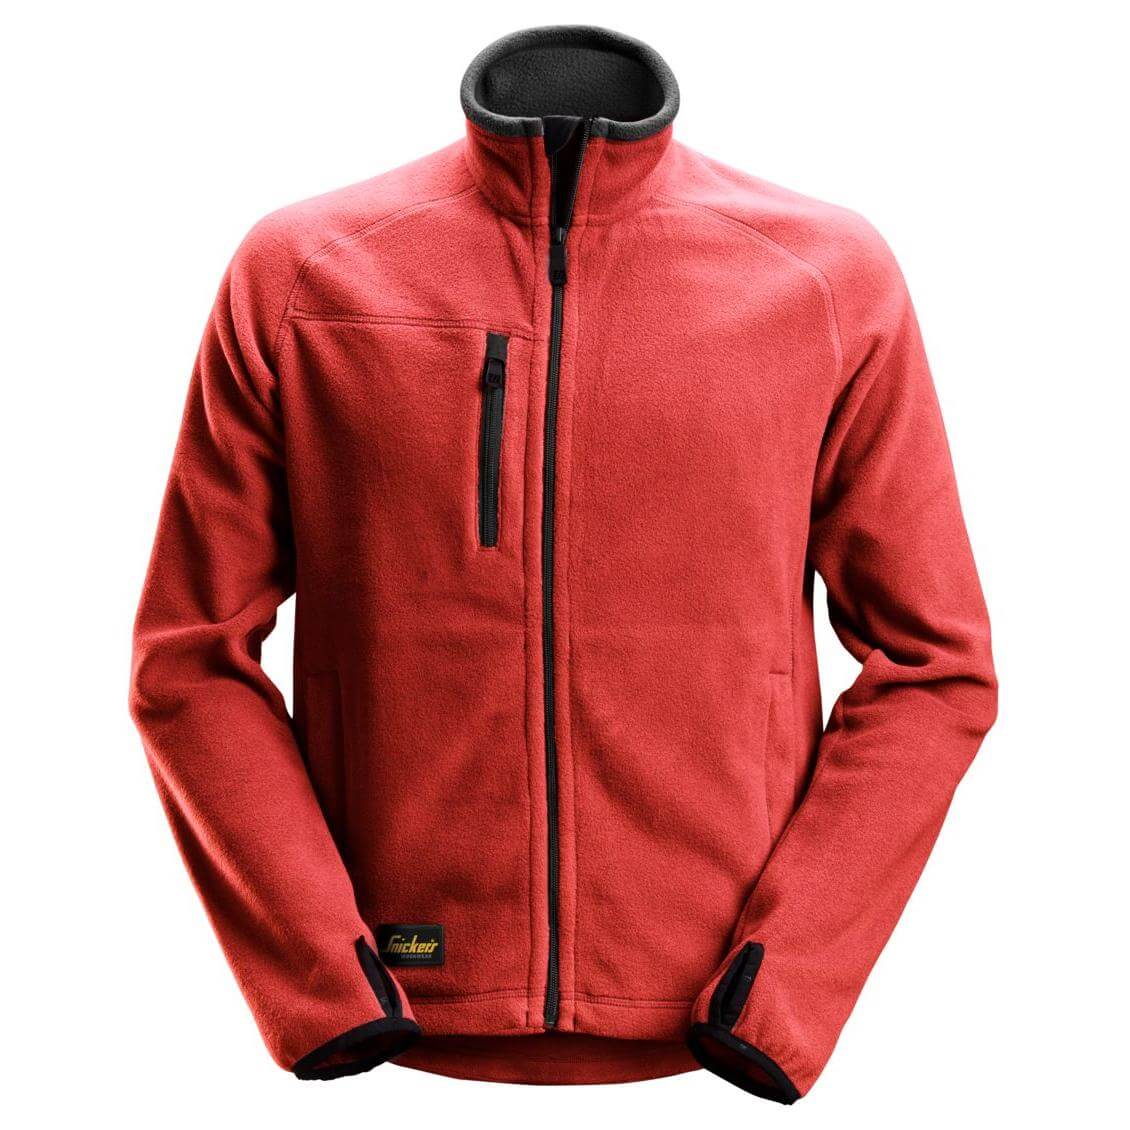 Snickers 8022 AllroundWork Warm Lightweight Fleece Jacket Chili Red Black Main #colour_chili-red-black